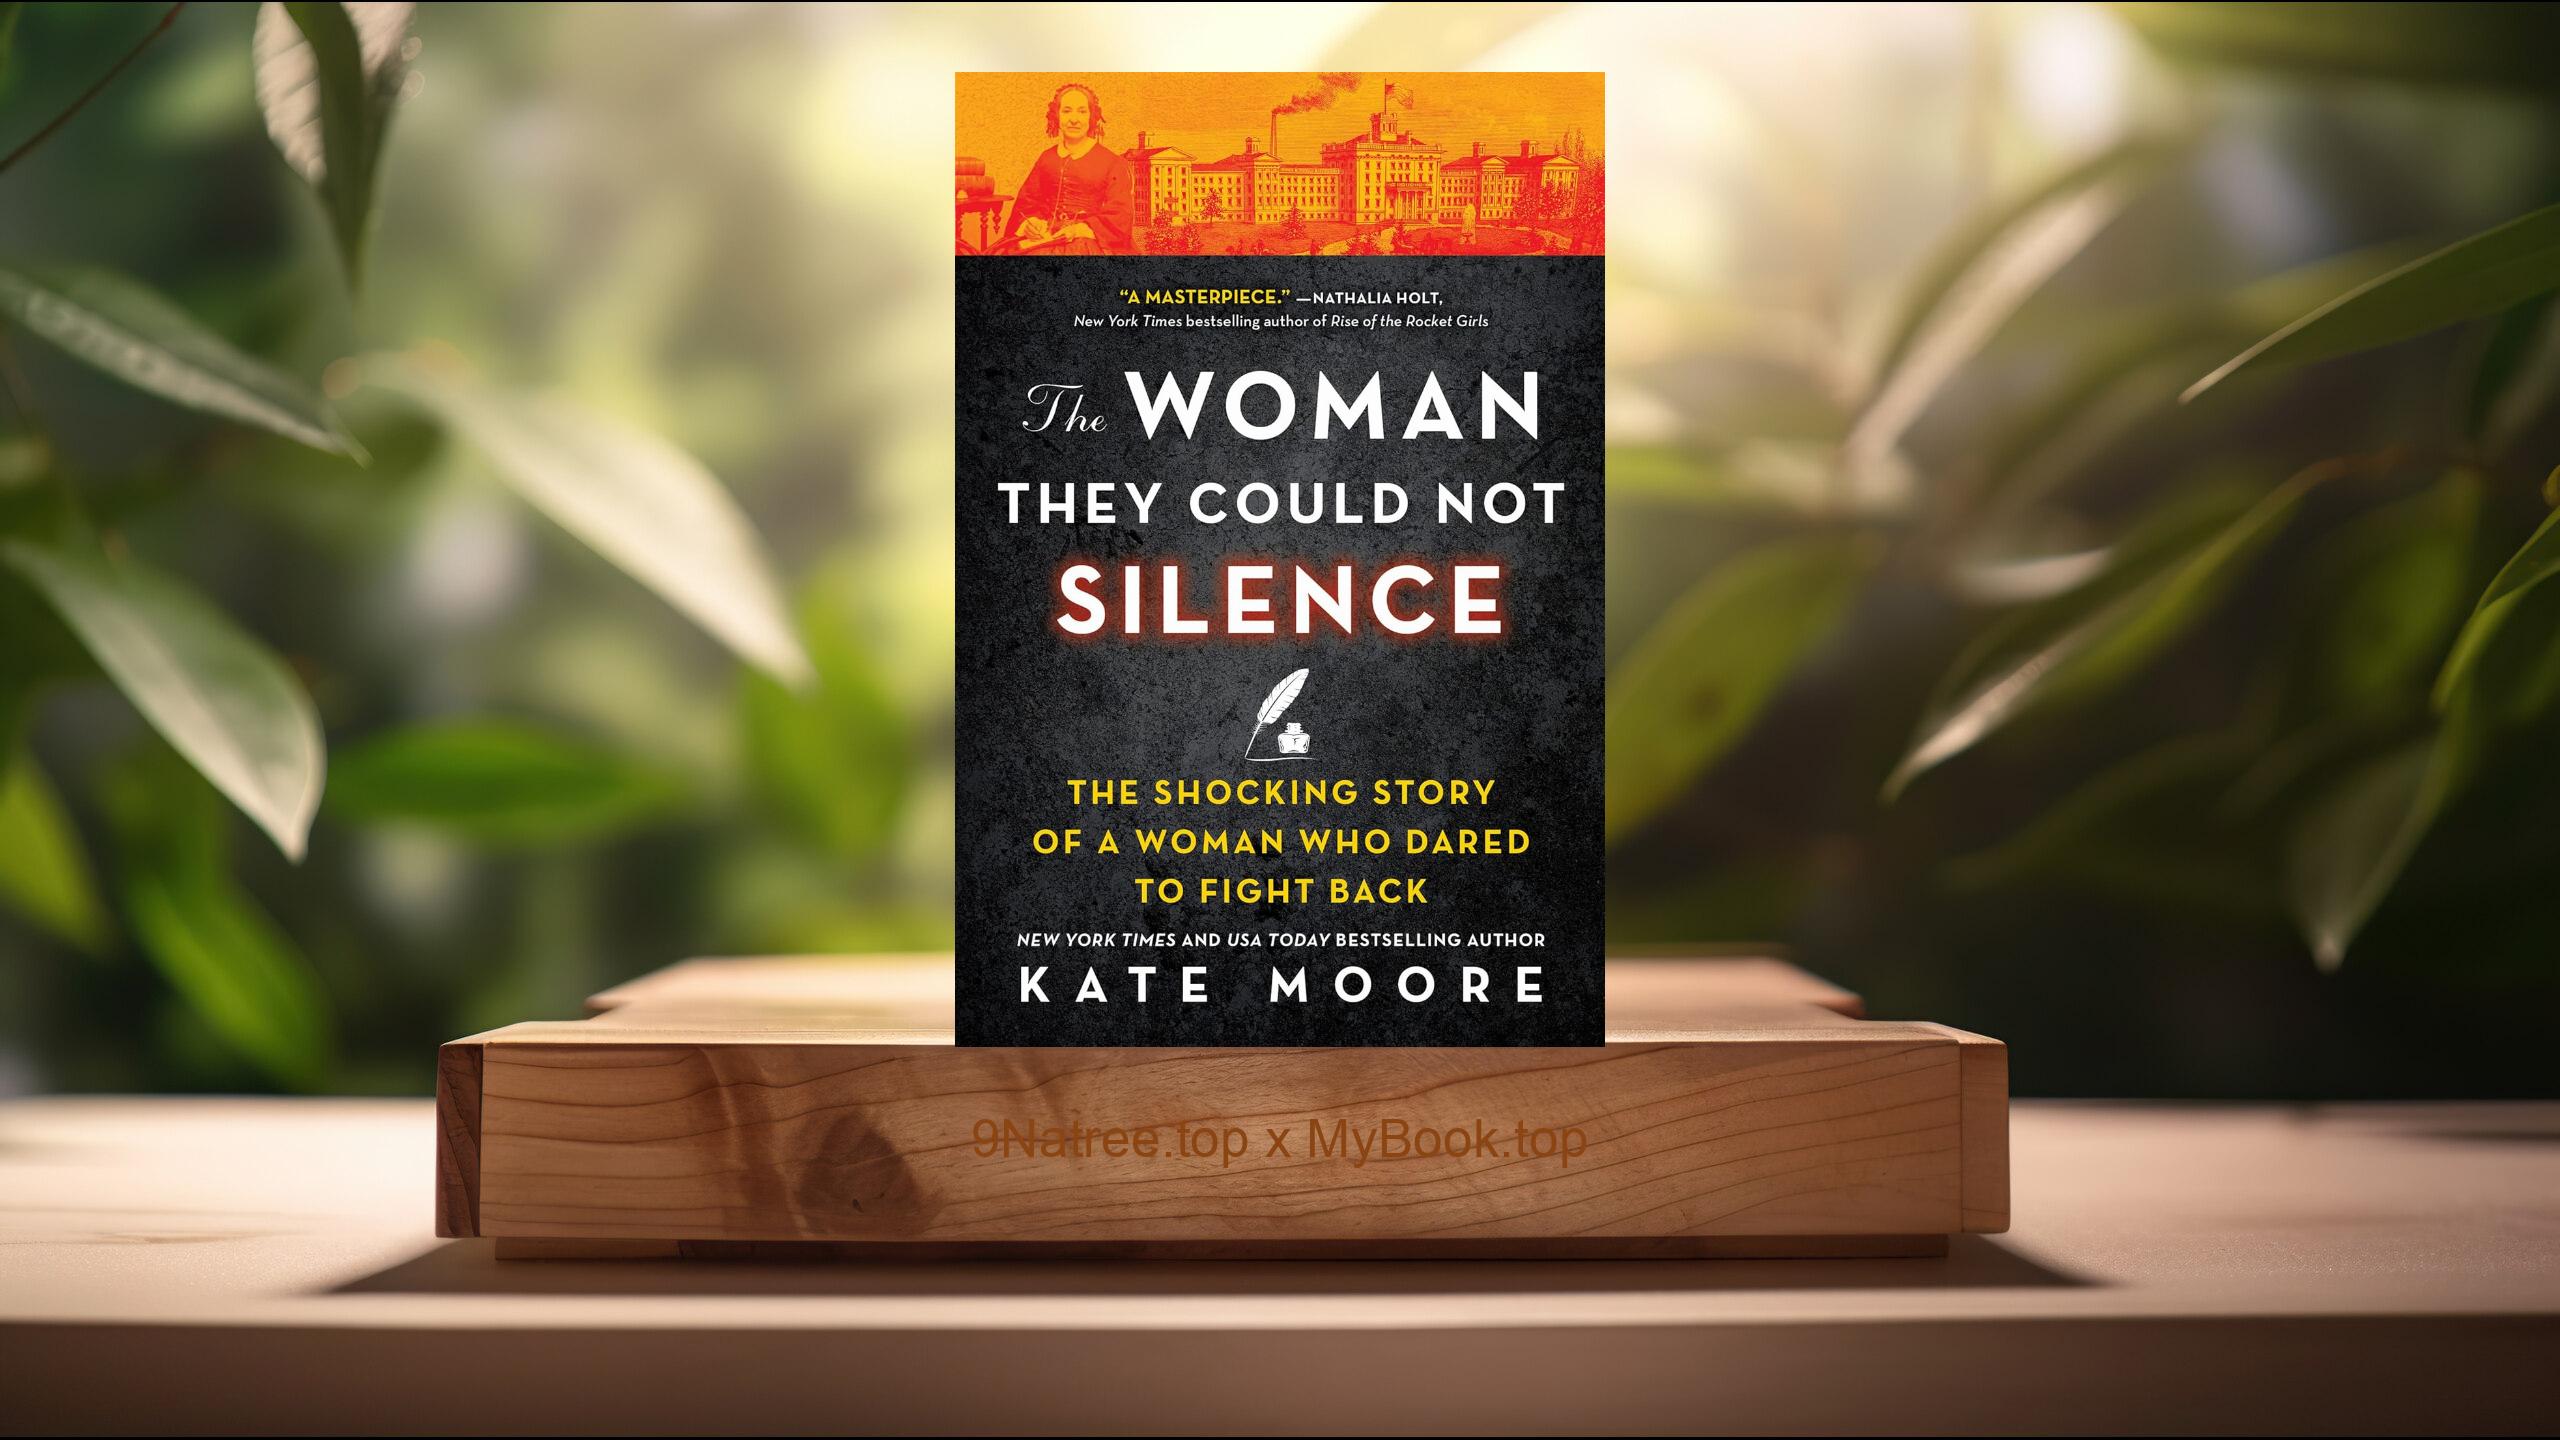 [Review] The Woman They Could Not Silence (Kate Moore) Summarized